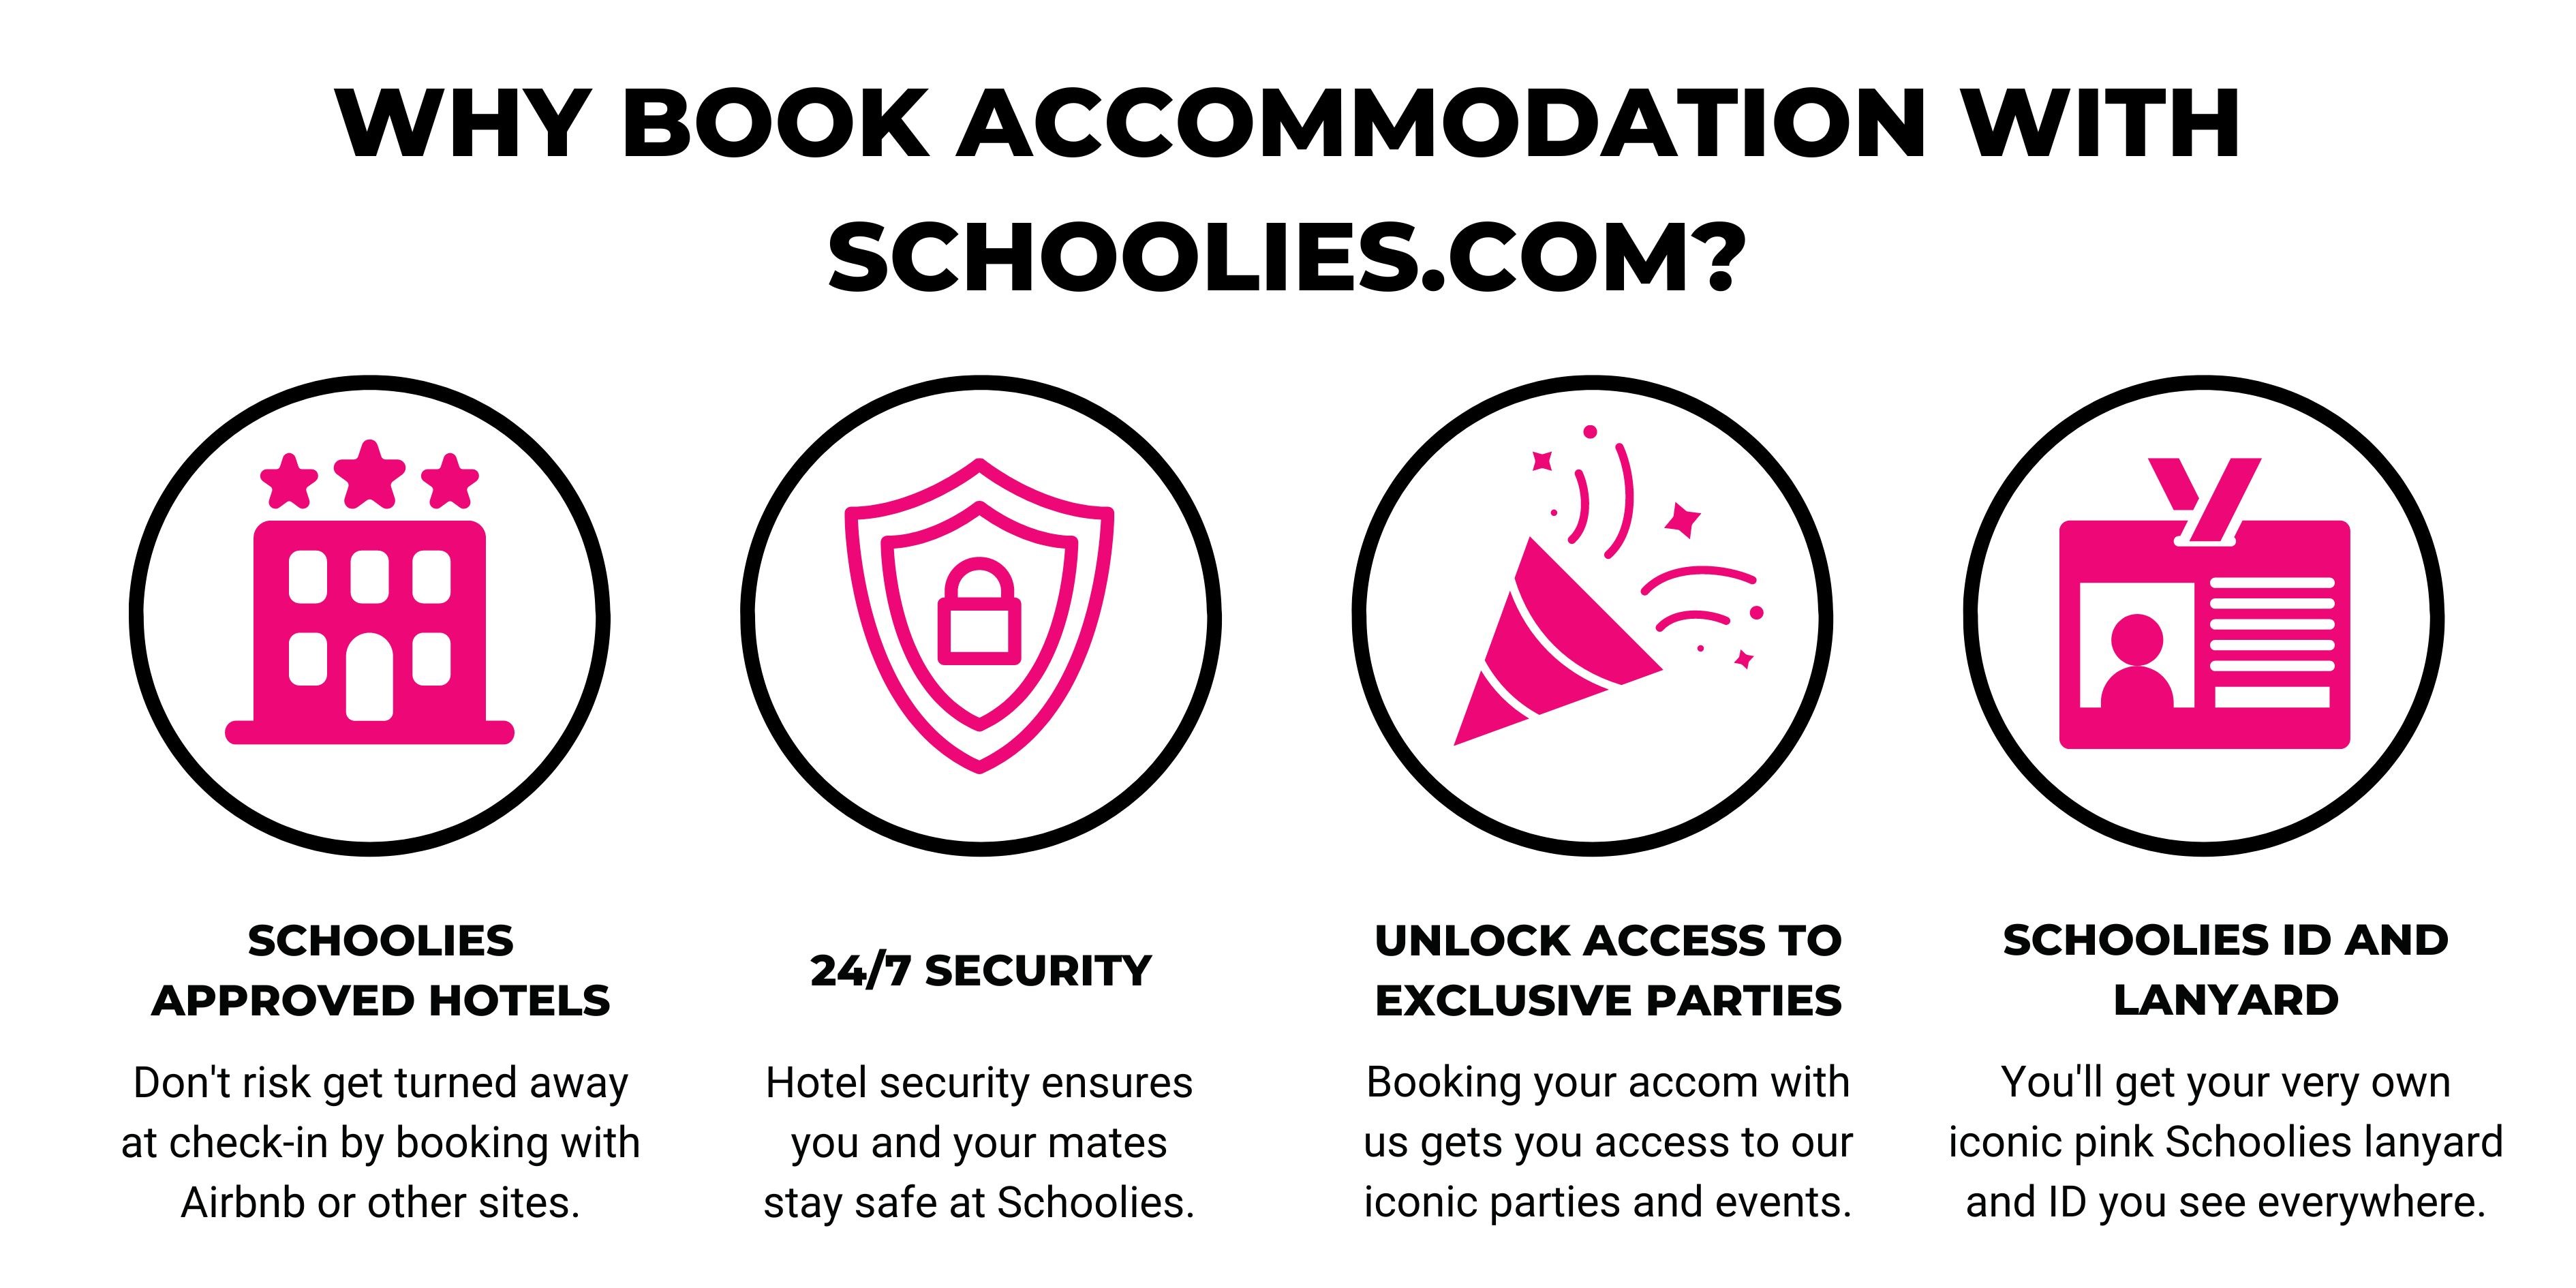 why-book-with-schoolies.com.jpg